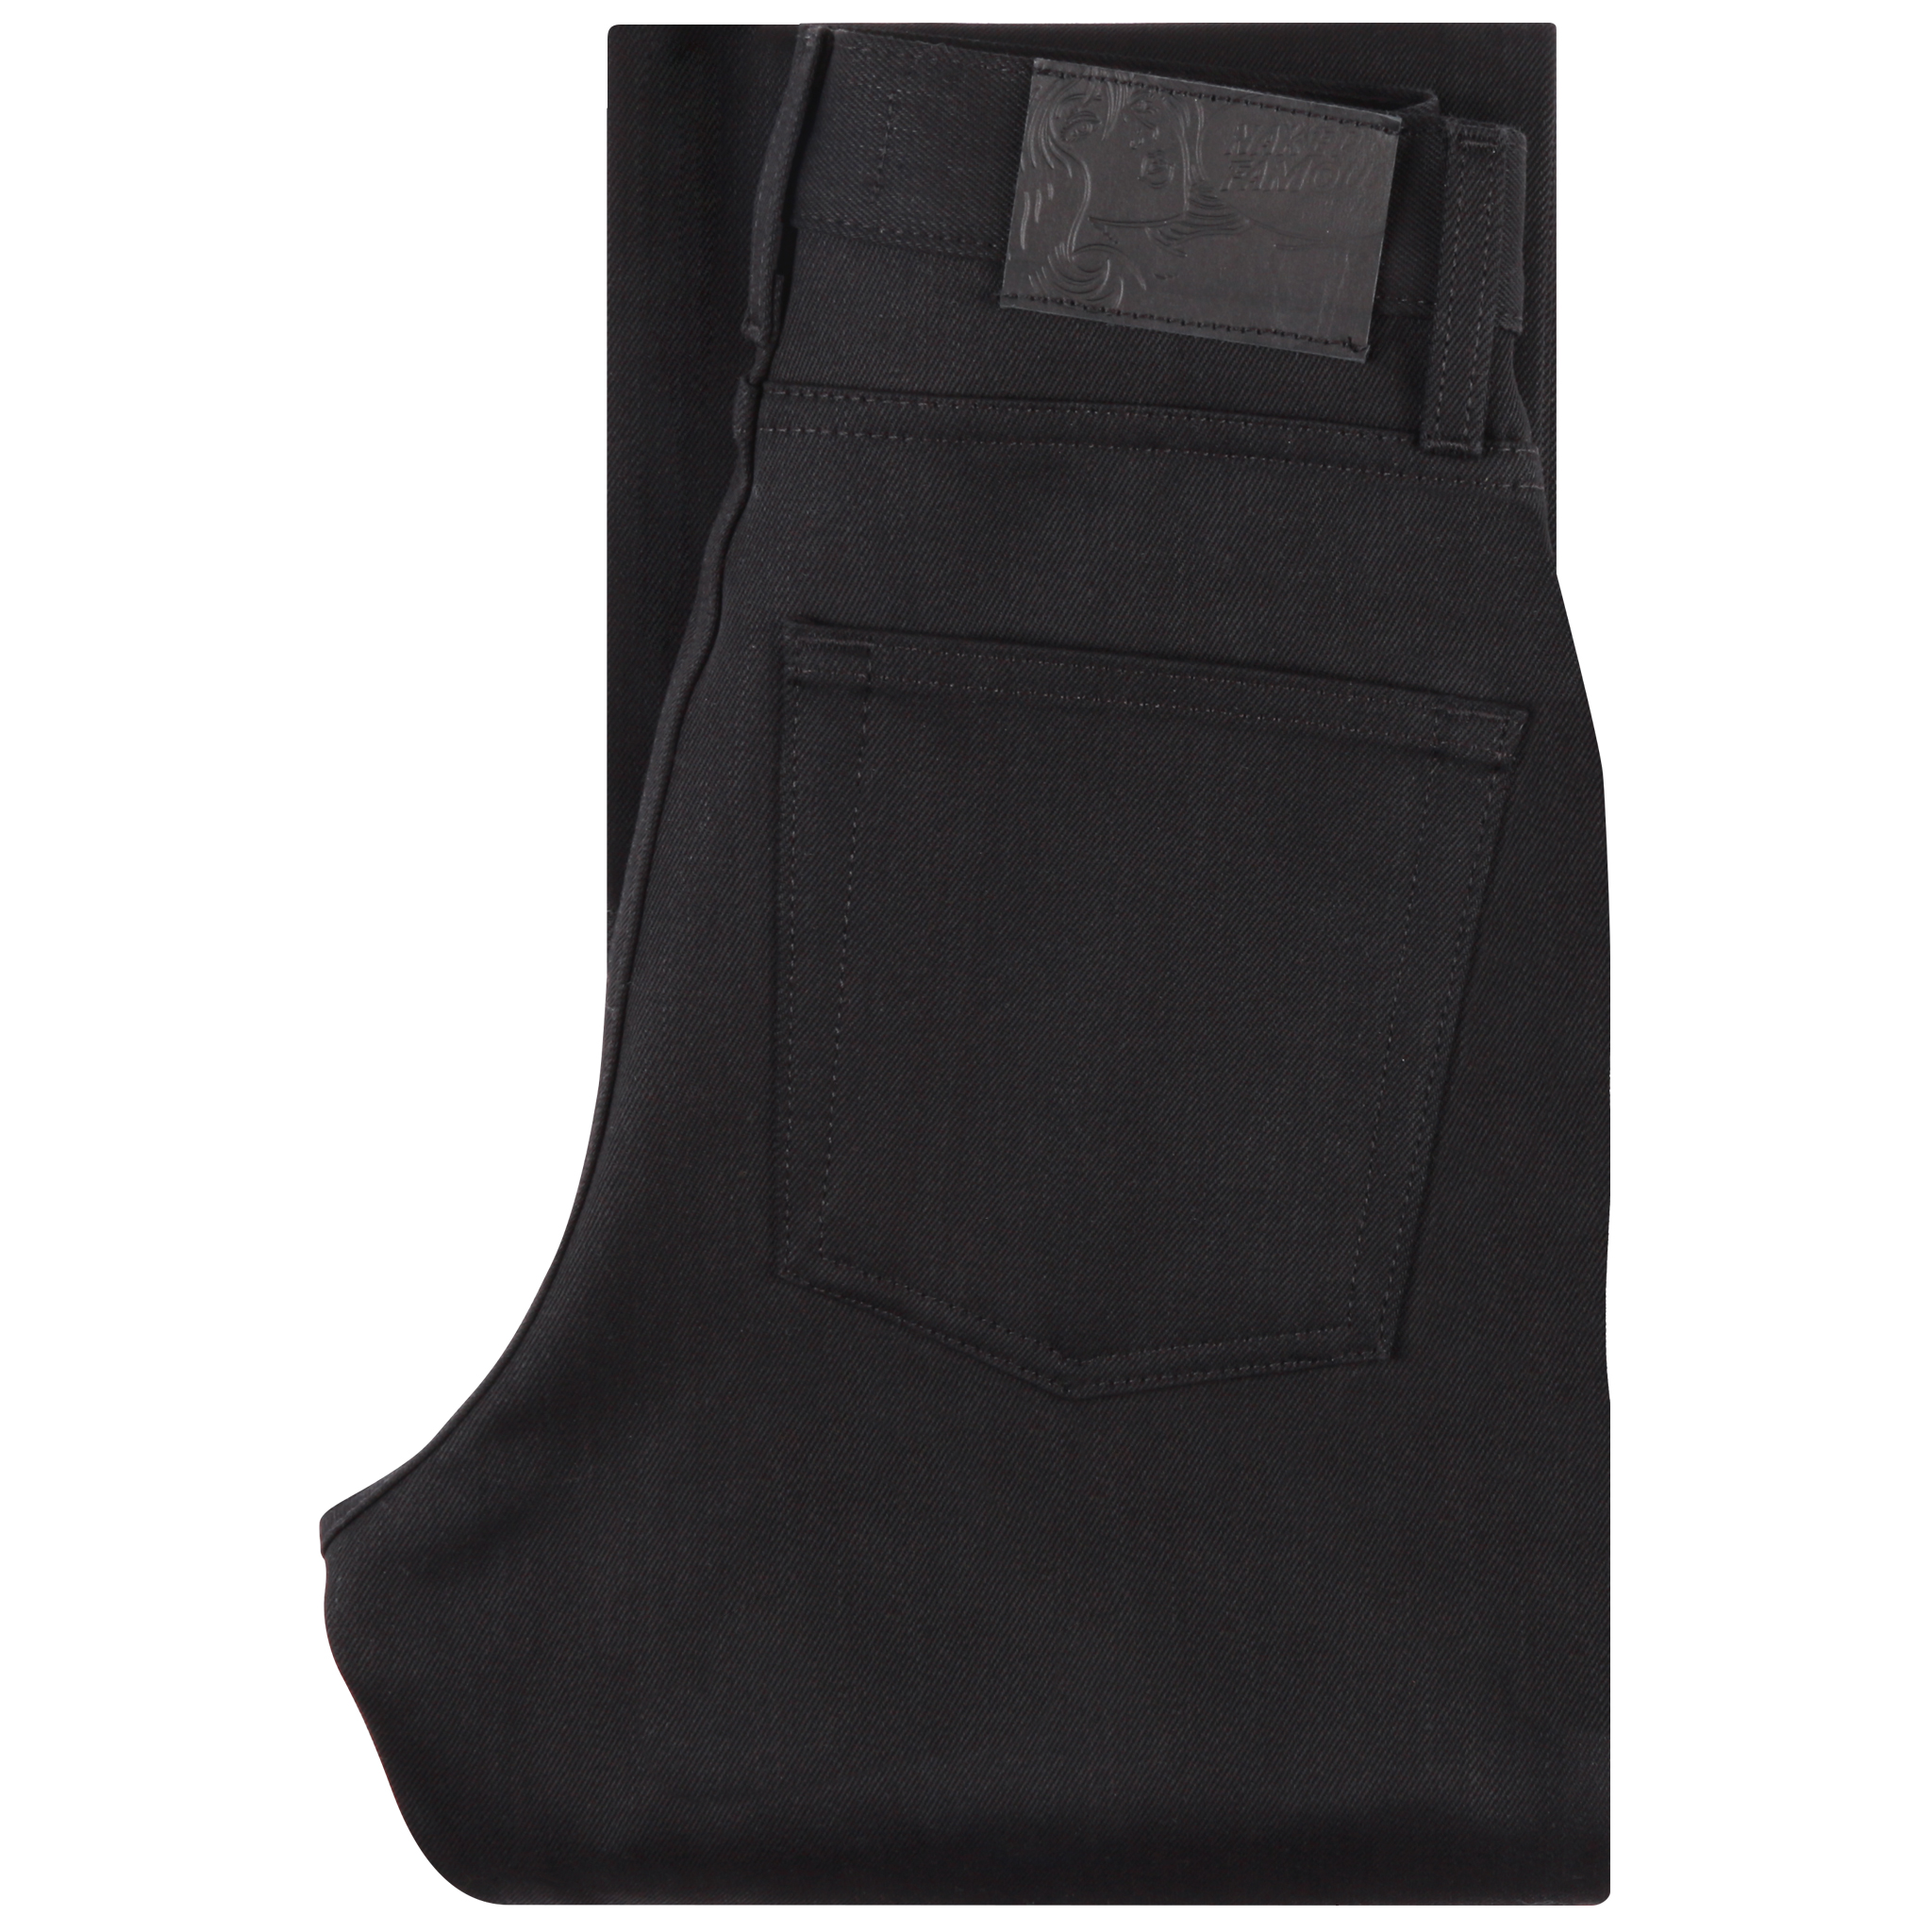  Women’s Solid Black Selvedge jeans folded view 